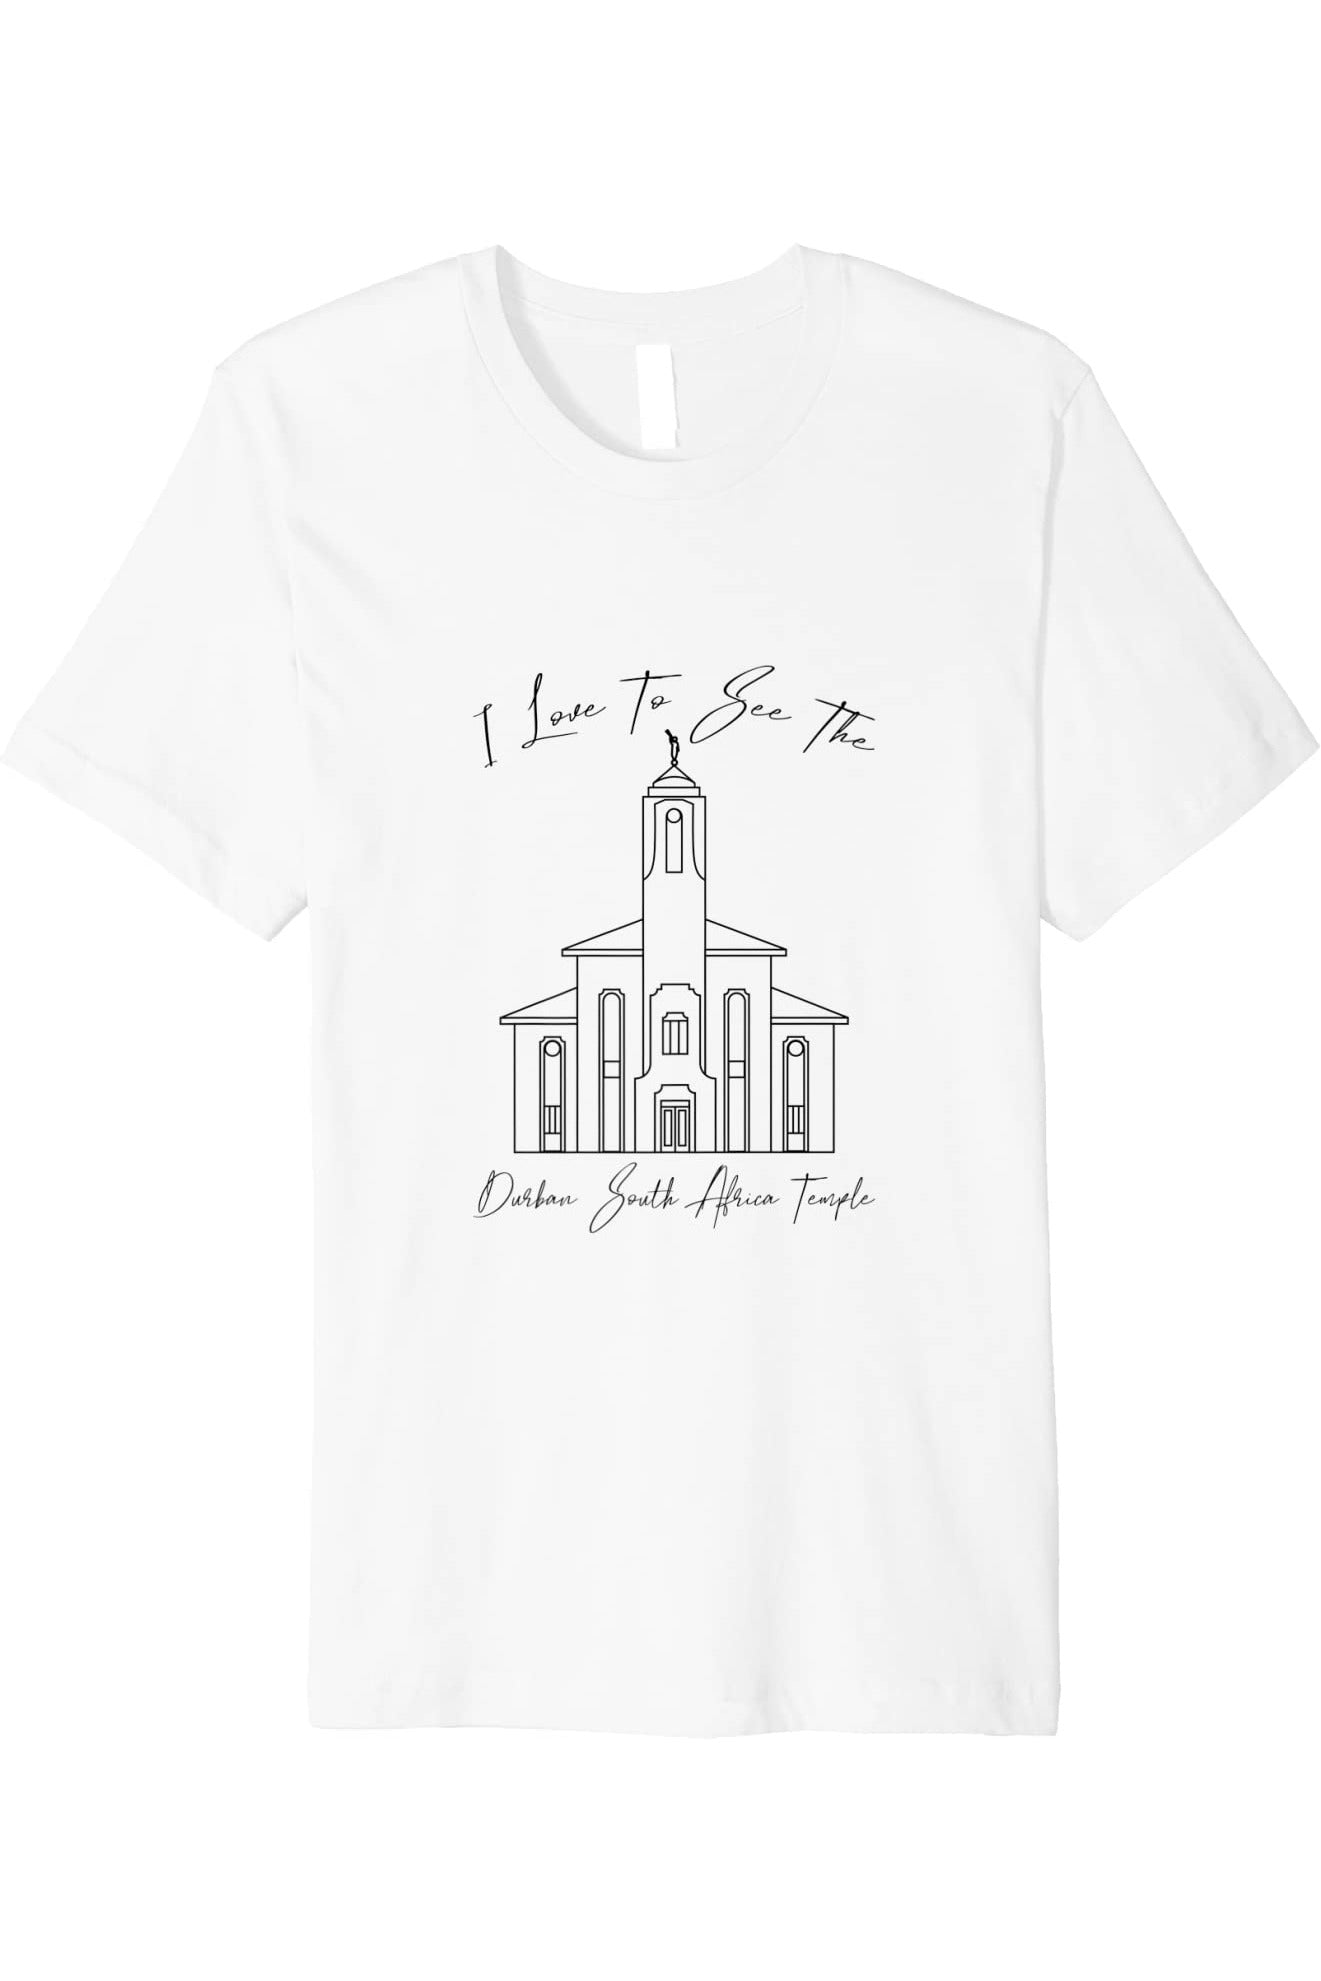 Durban South Africa Temple T-Shirt - Premium - Calligraphy Style (English) US